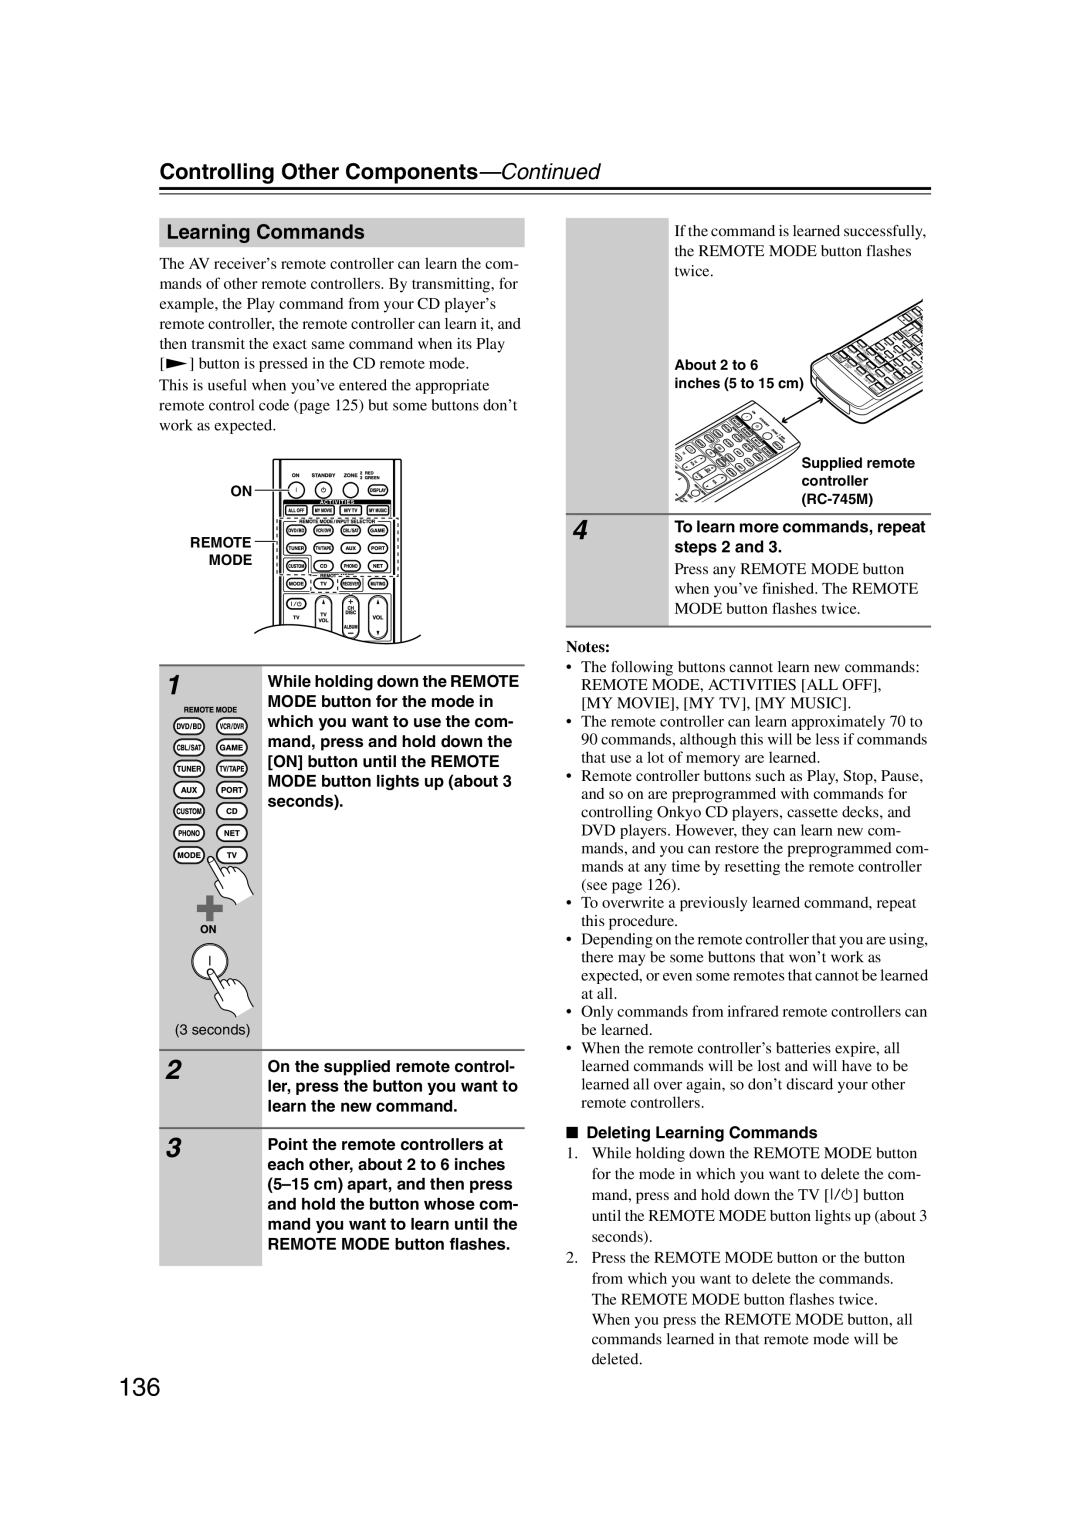 Onkyo HT-RC180, 29400021, TX-NR807 instruction manual Learning Commands, Controlling Other Components—Continued, Notes 